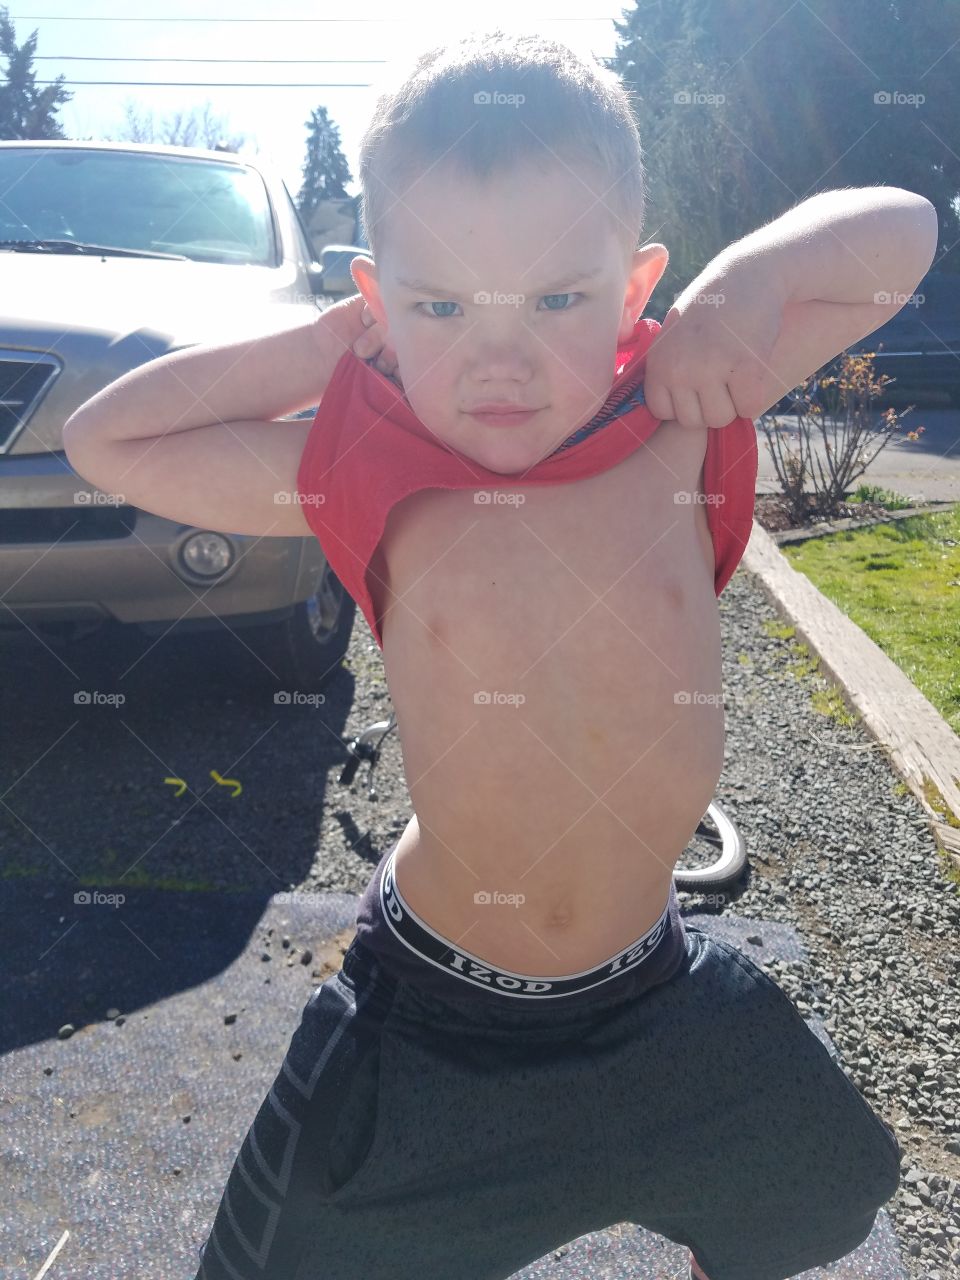 "look at my six pack, mom!"